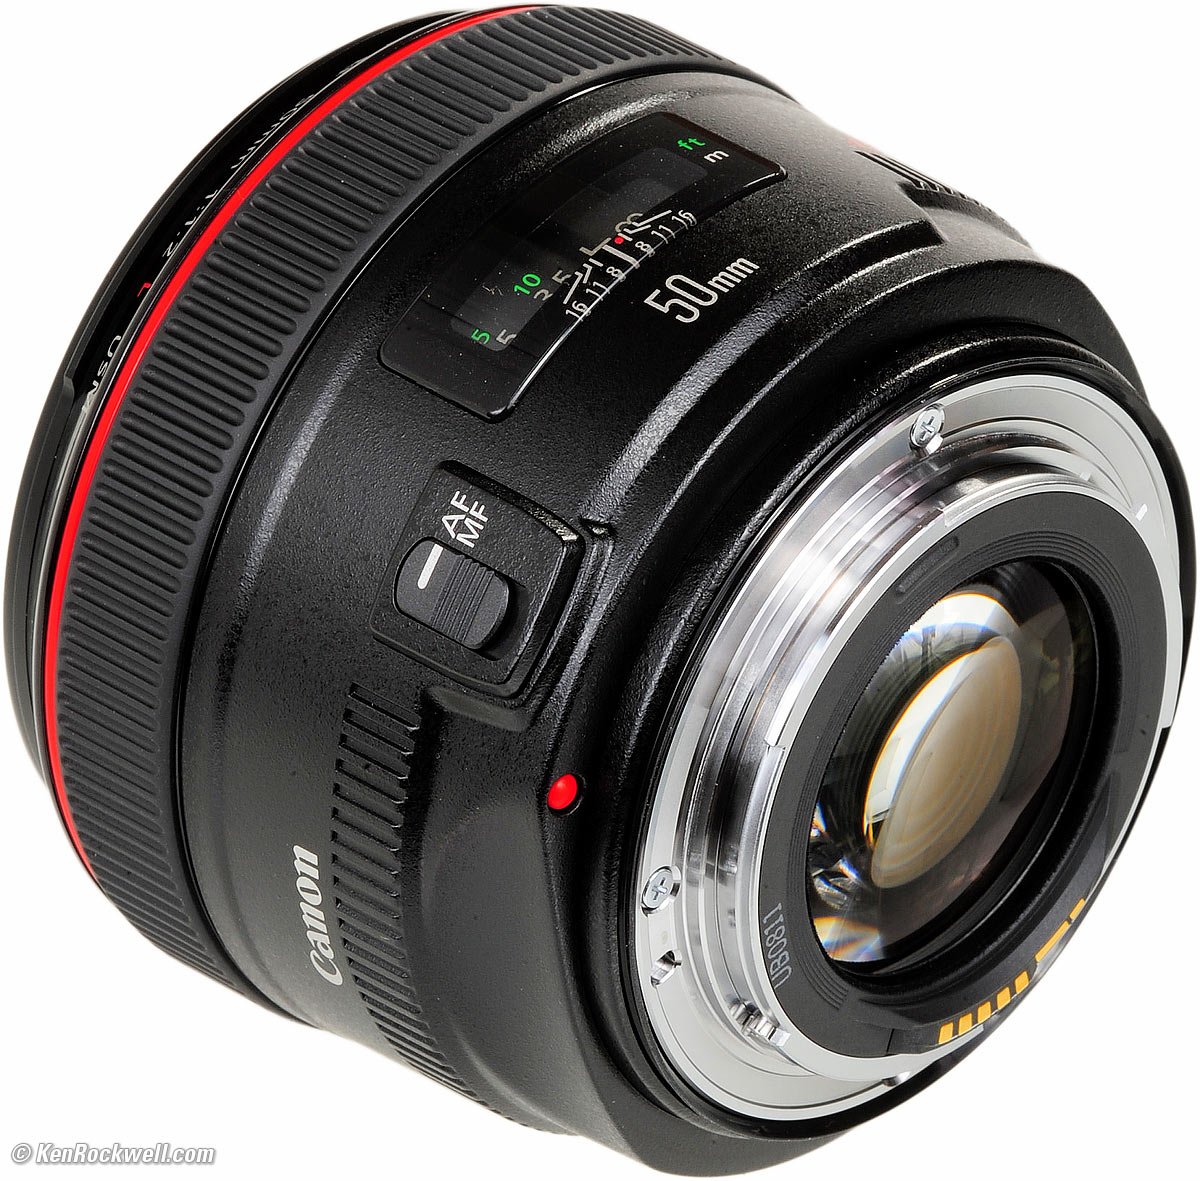 Canon 50mm f/1.2 L Review, continued